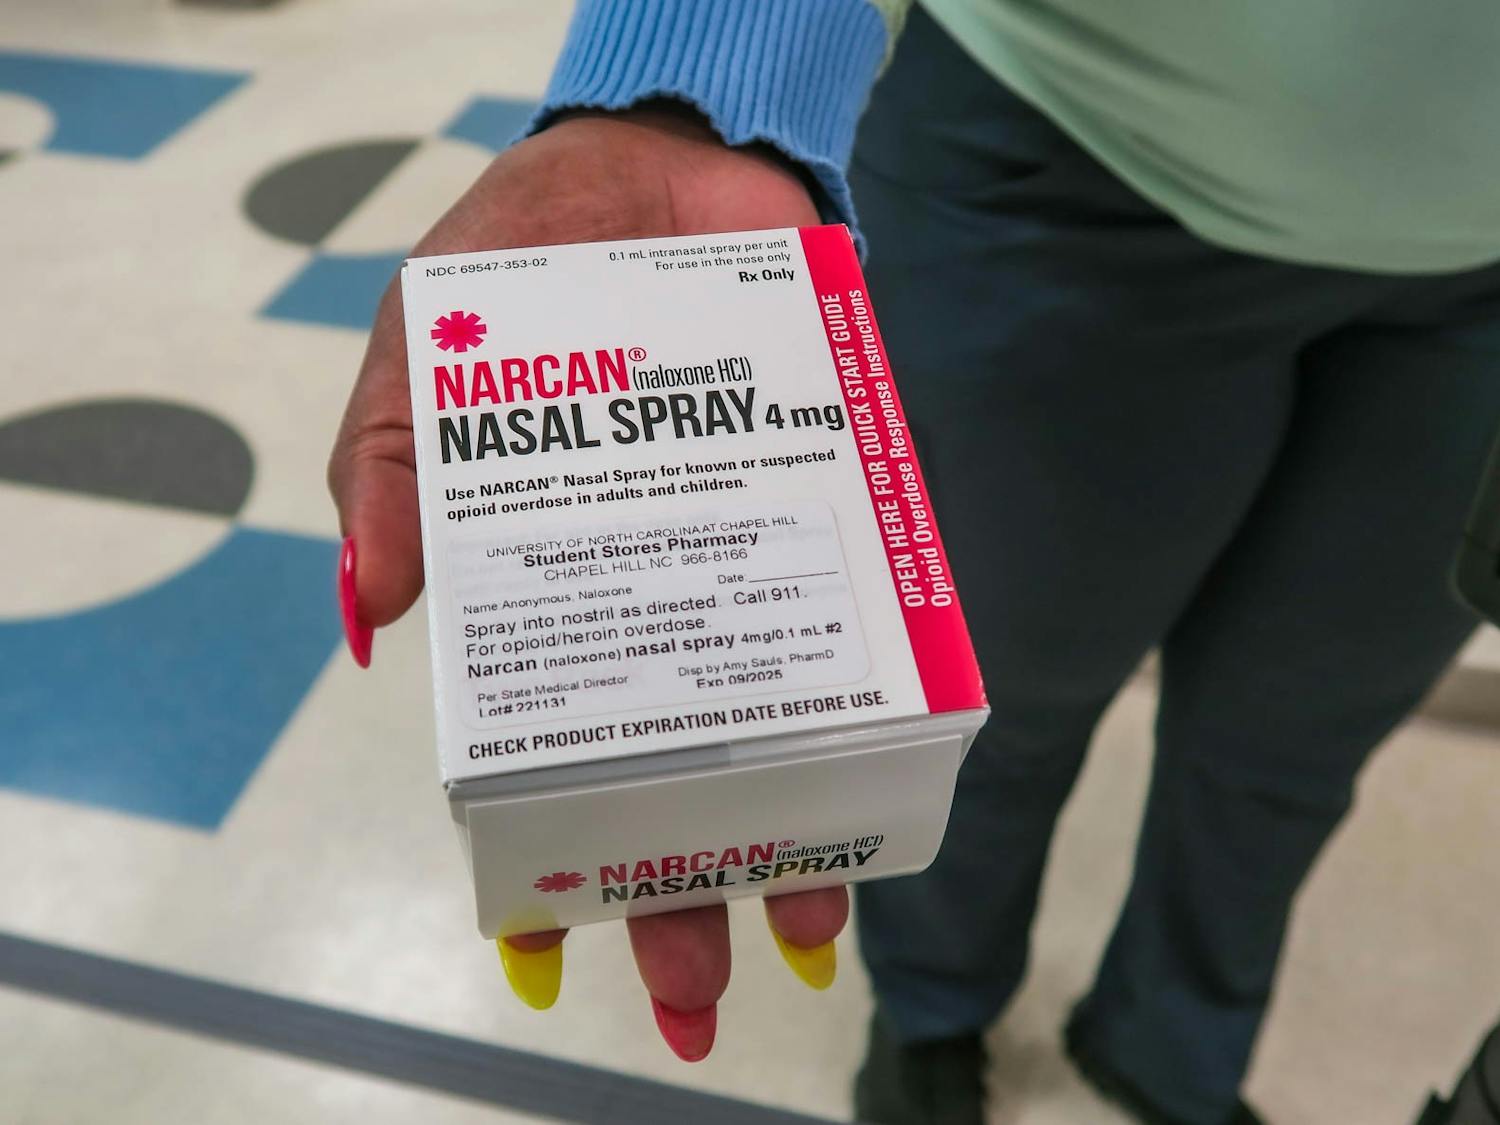 20230339_Moss_opinion-narcan-harm-reduction-accessibility-3.jpg